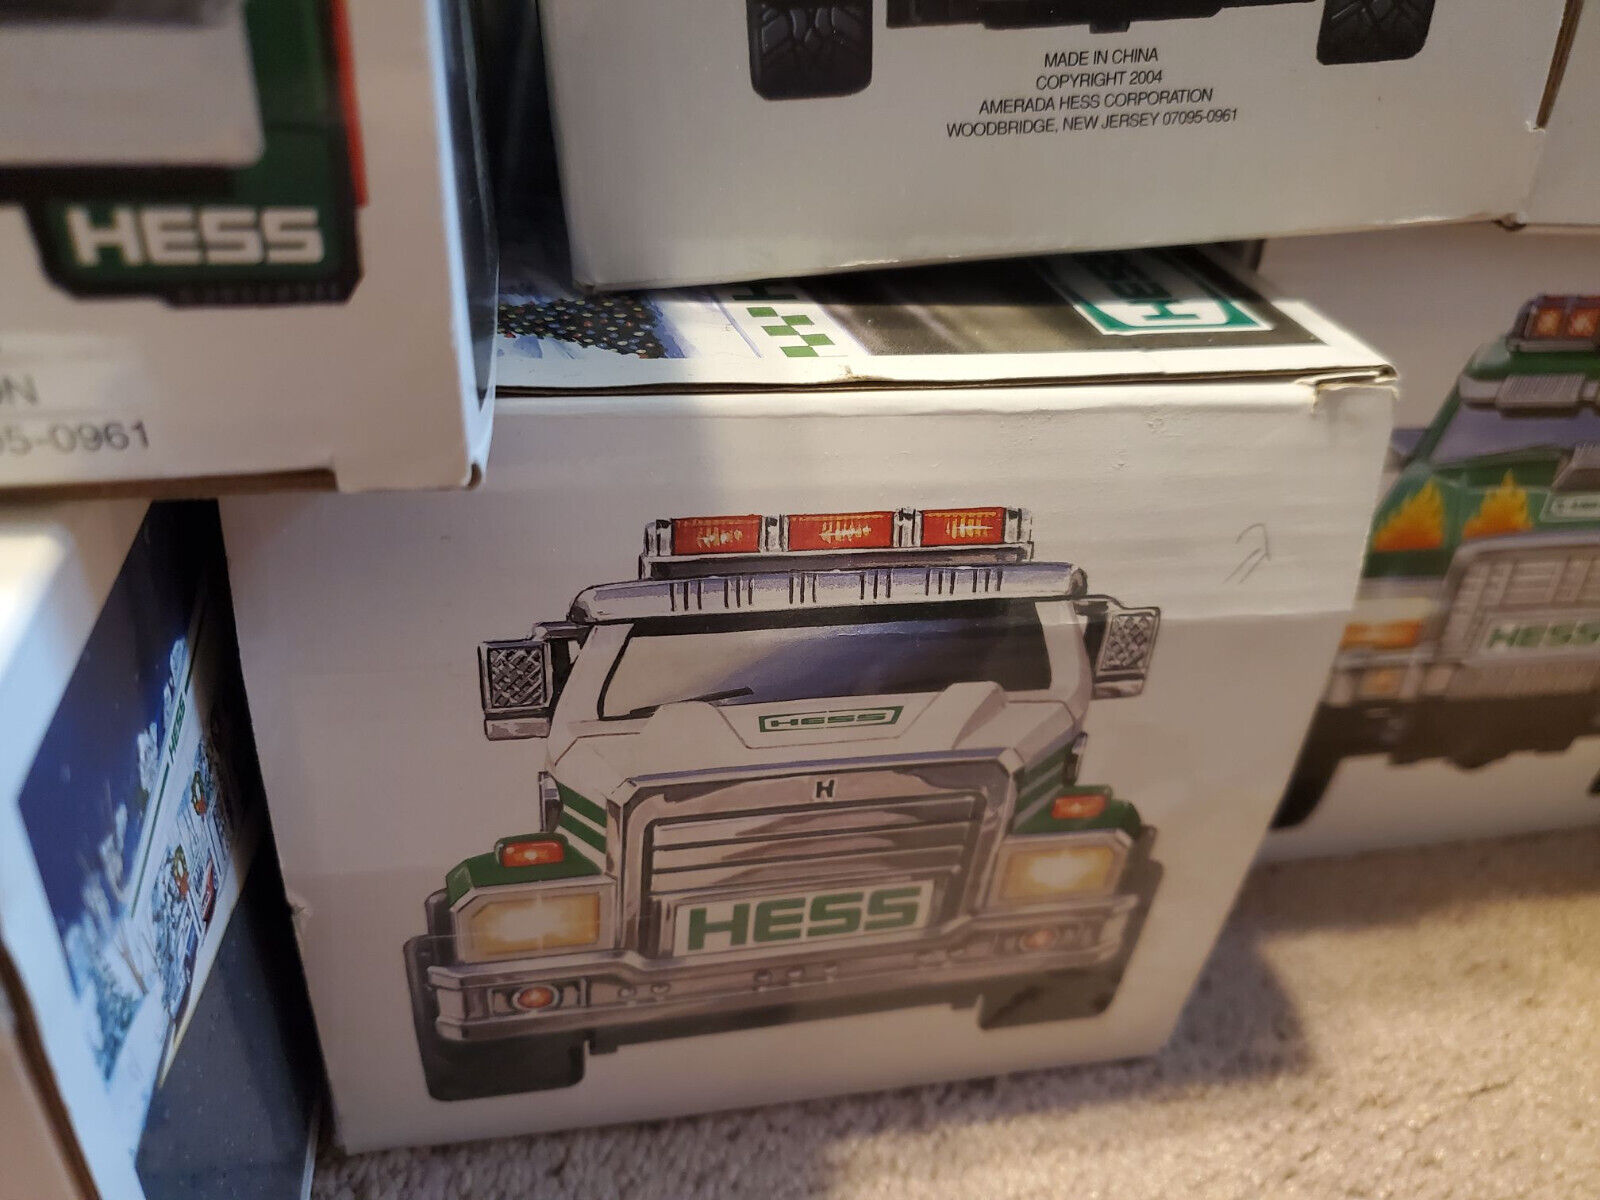 Hess Christmas Toy Truck 2011, Truck with Racecar, Boxed, See Description